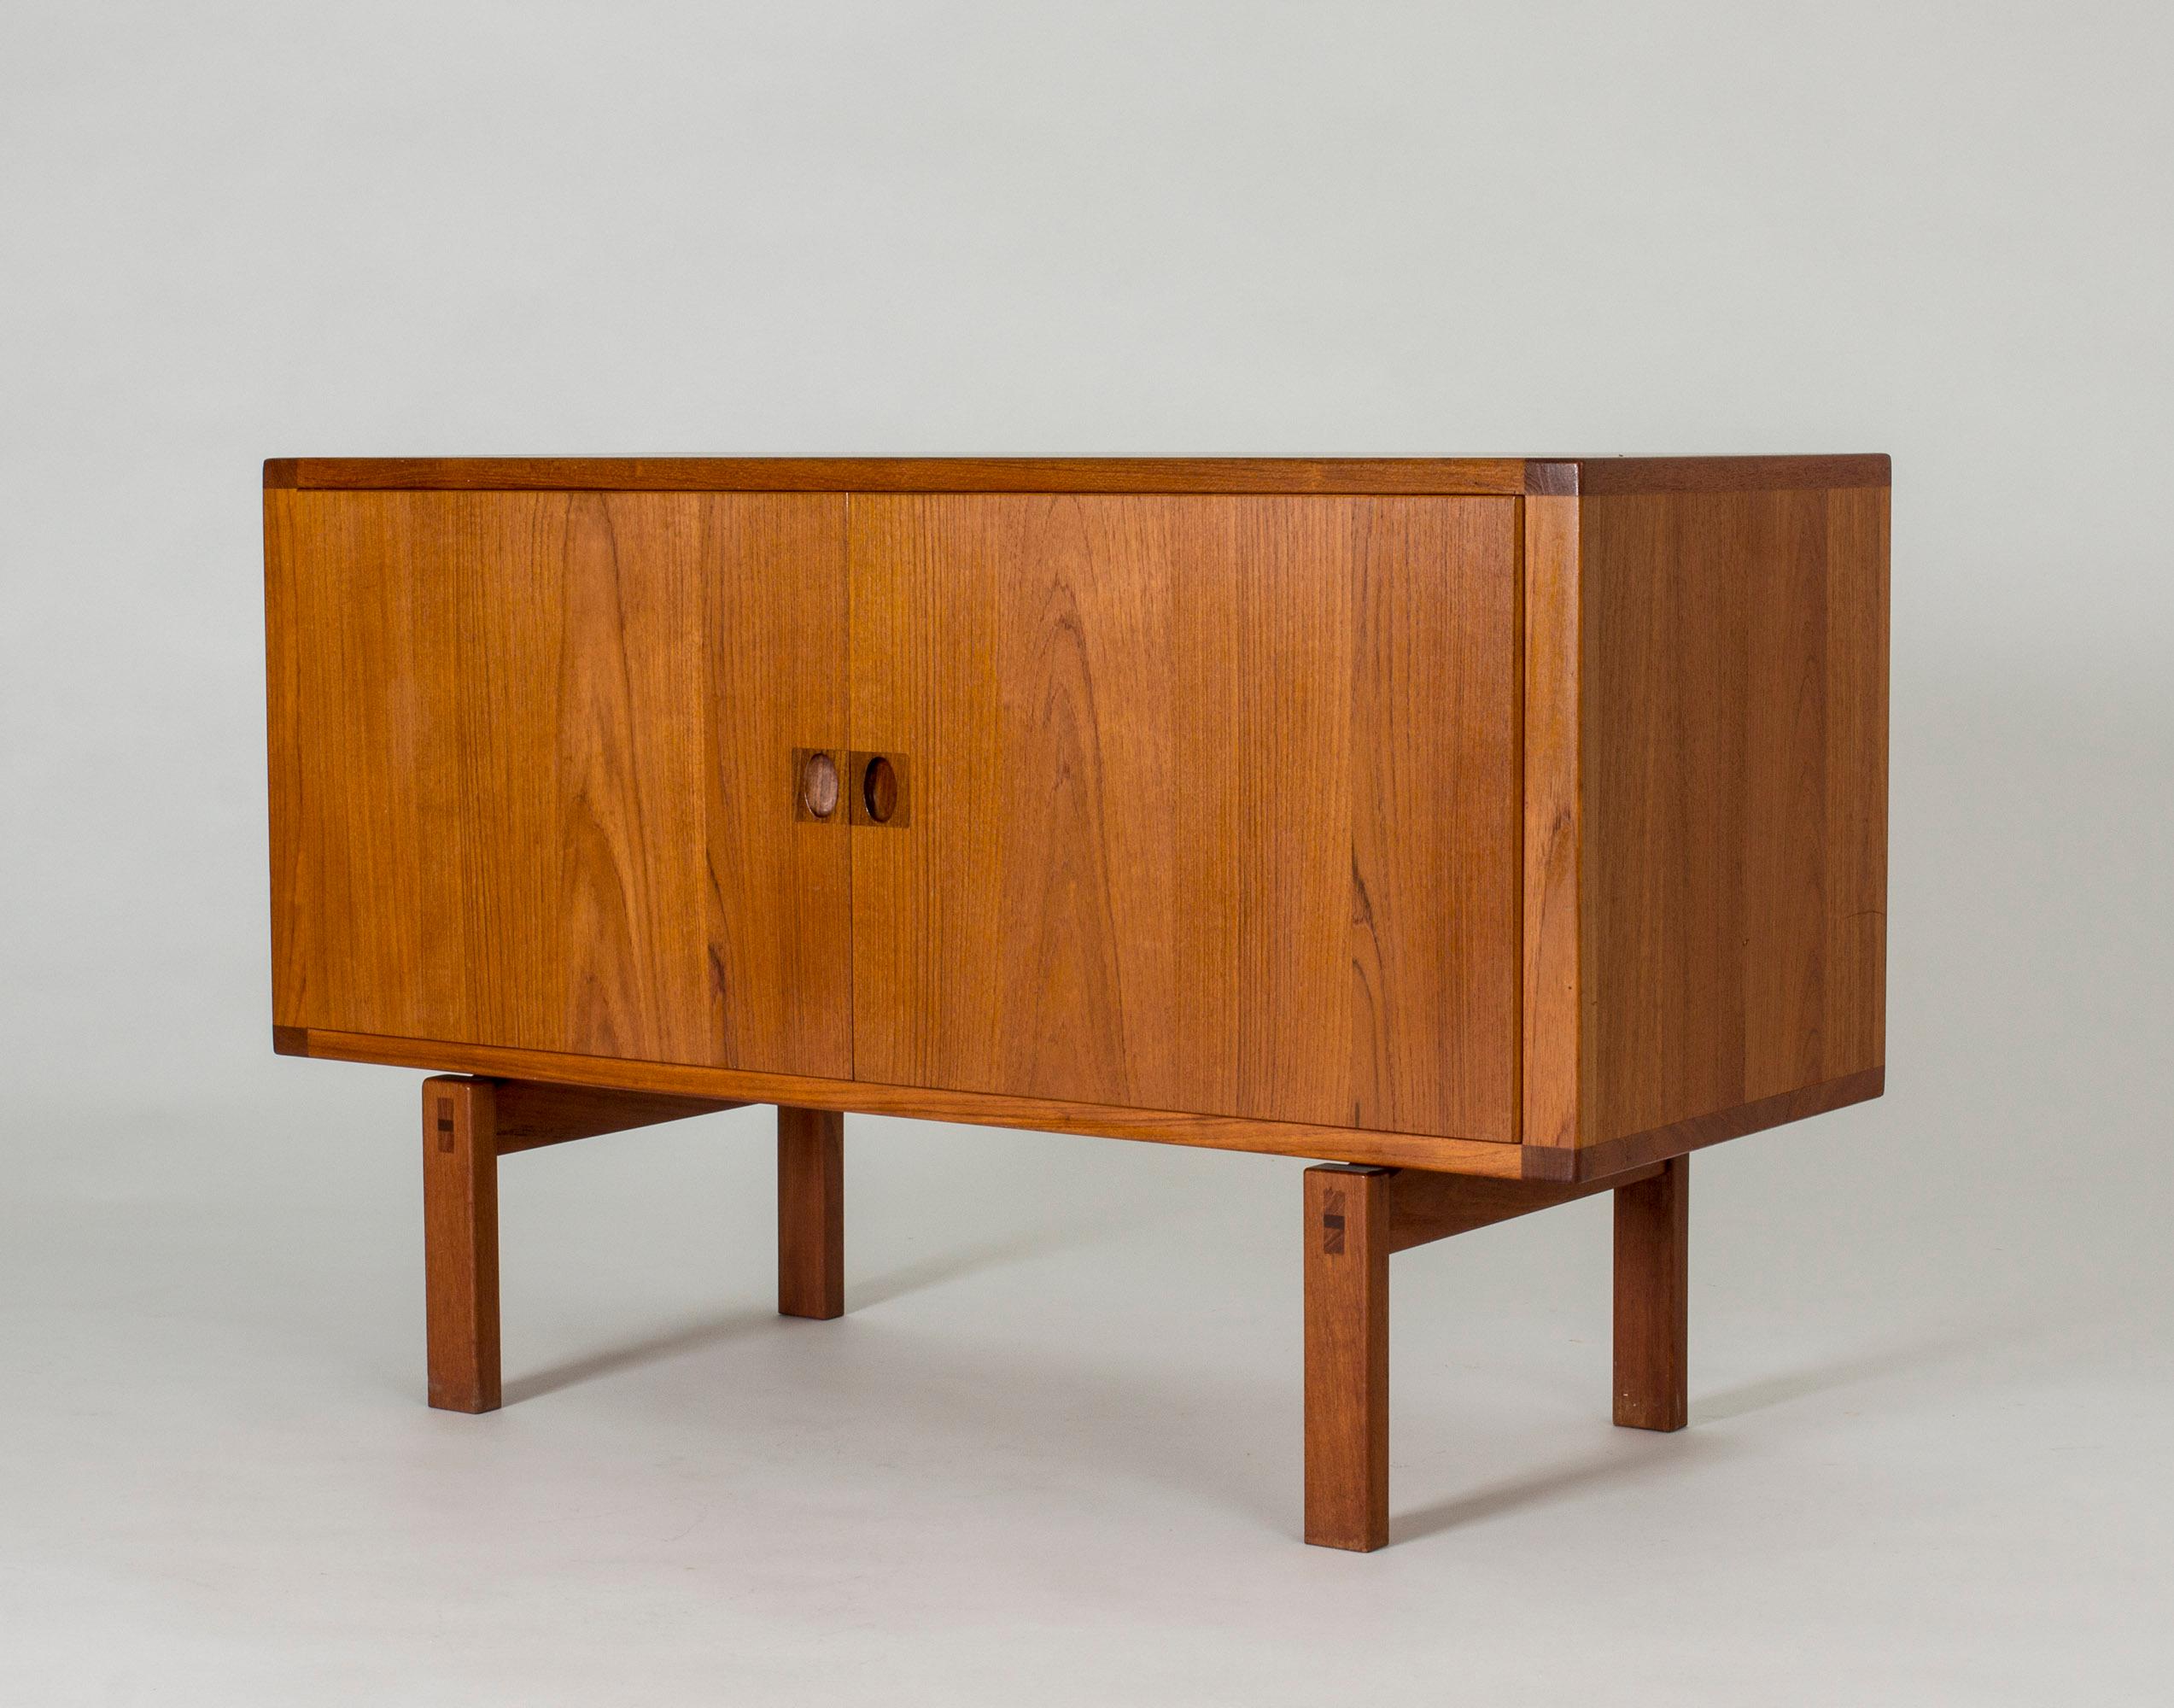 Small teak sideboard by Lennart Bender with decorative carved out handles and inlays at the tops of the legs. Veneer on the back.